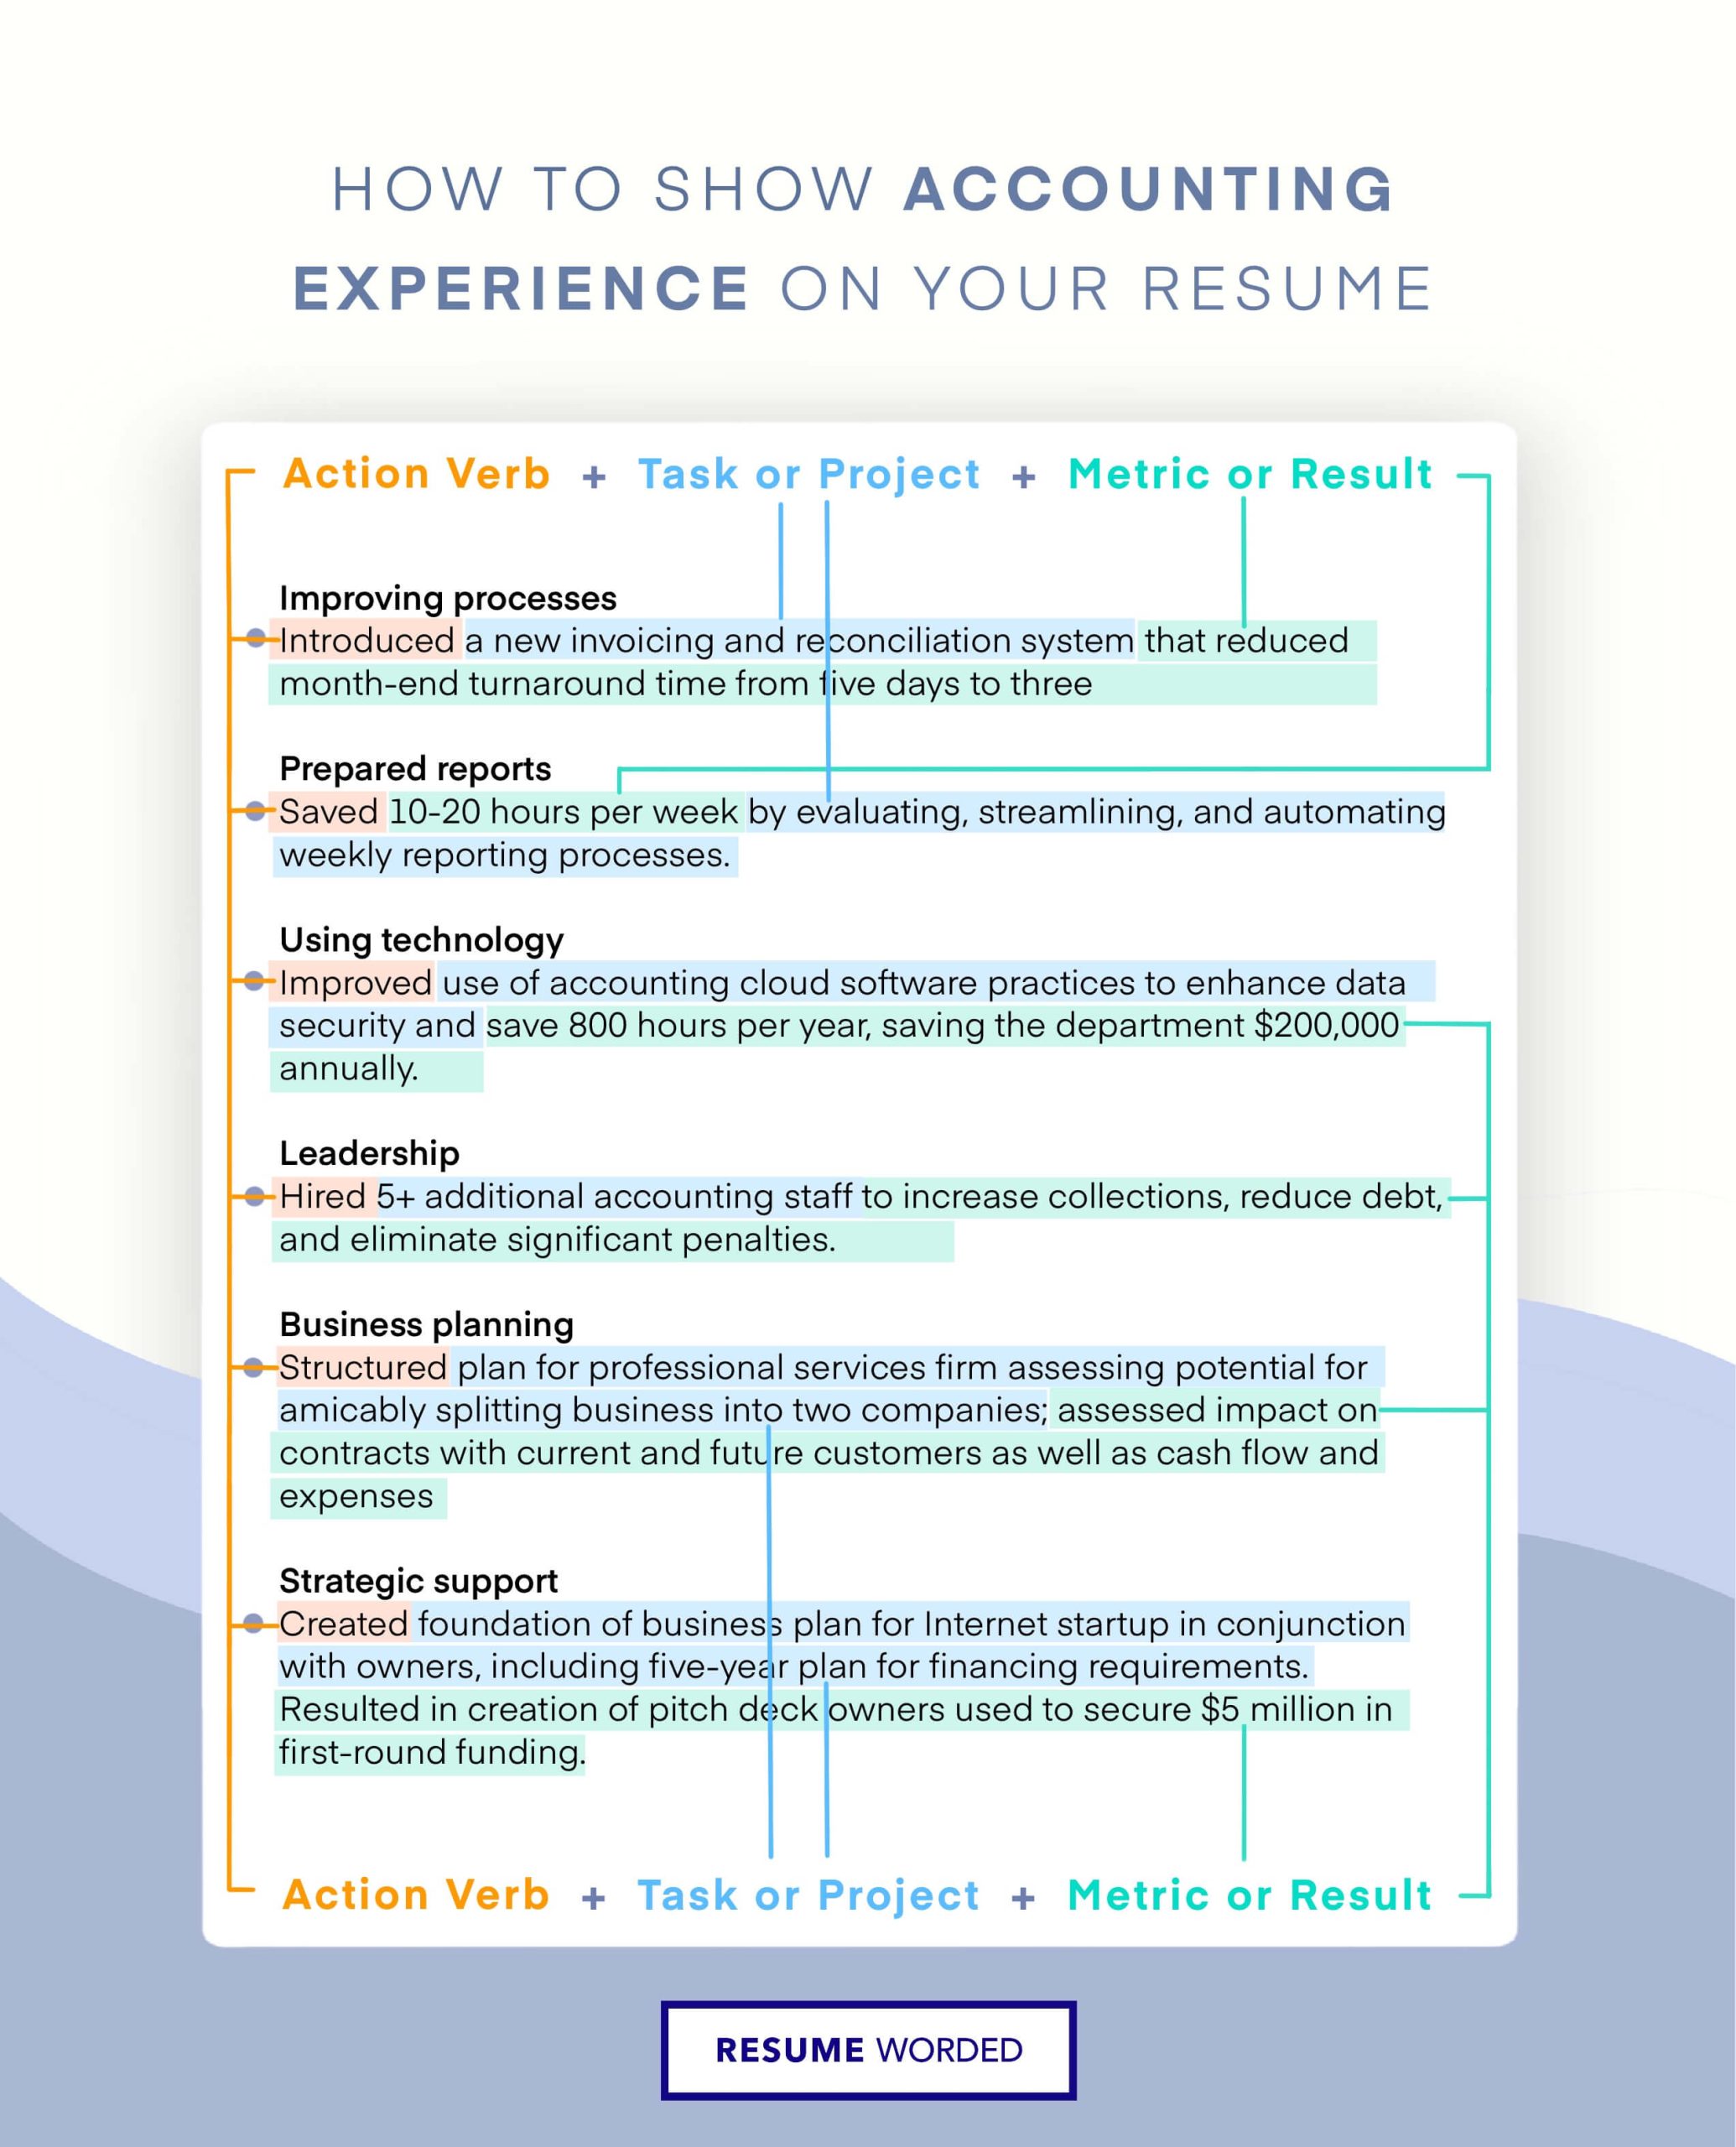 Sample Of Junior Private Equity Accountant Resume Junior Accountant Resume Example for 2022 Resume Worded